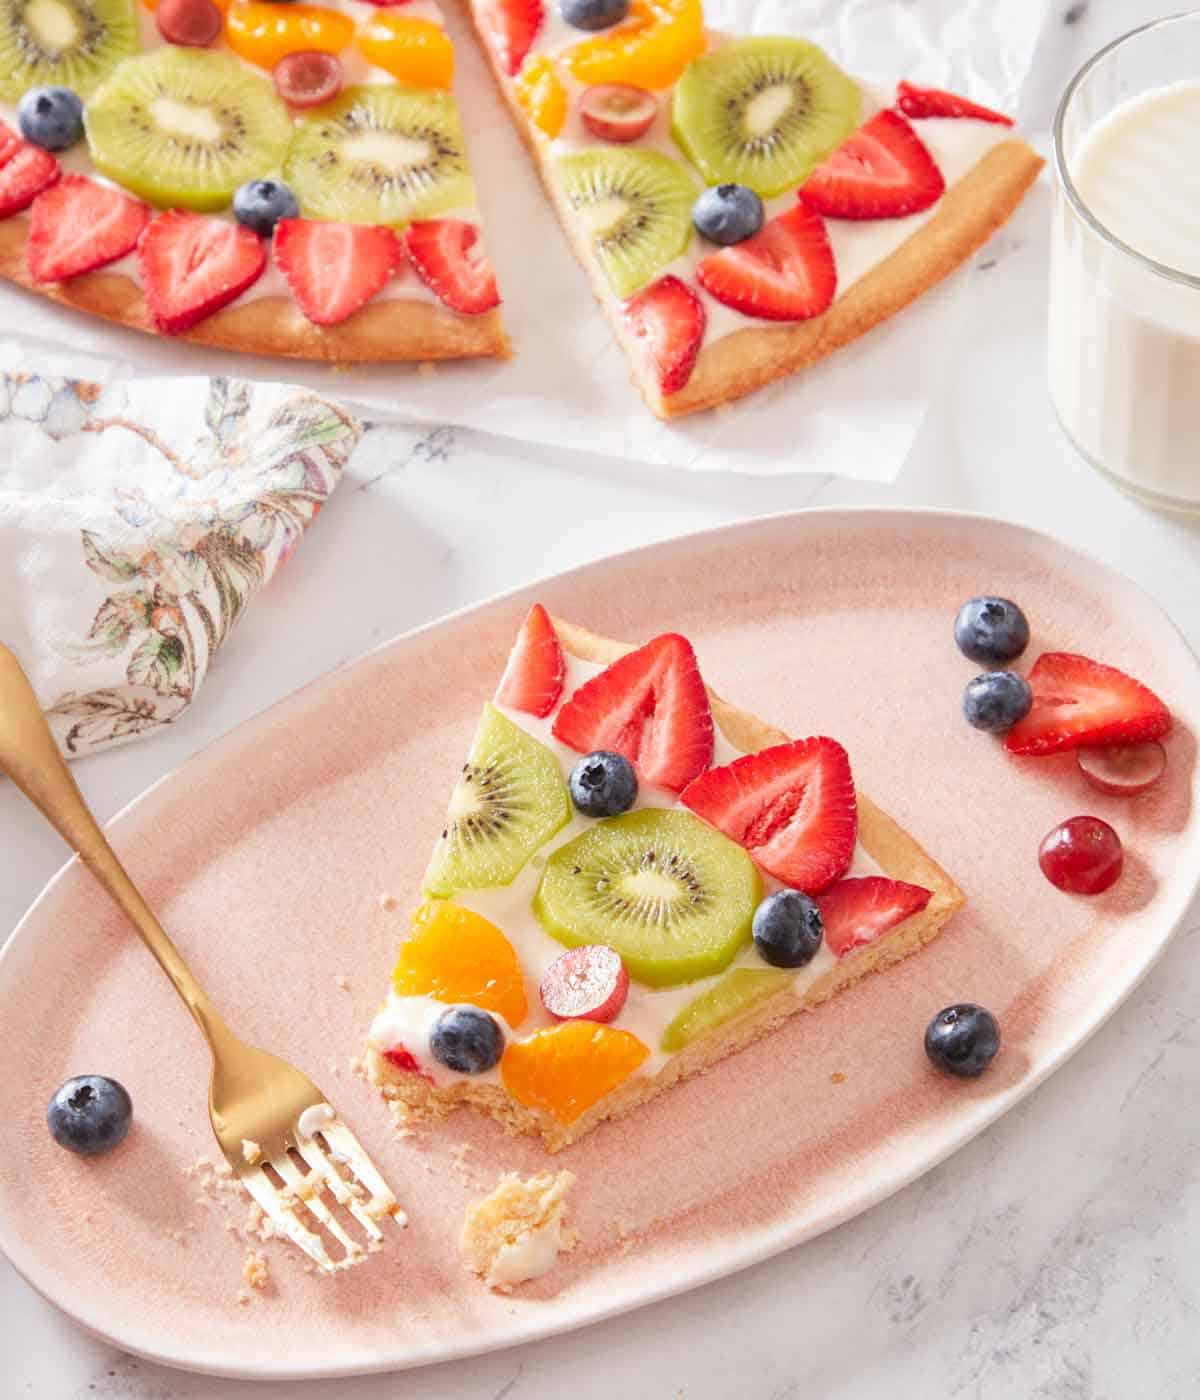 An oval plate with a slice of fruit pizza with a bite taken with more fresh fruit on the plate.